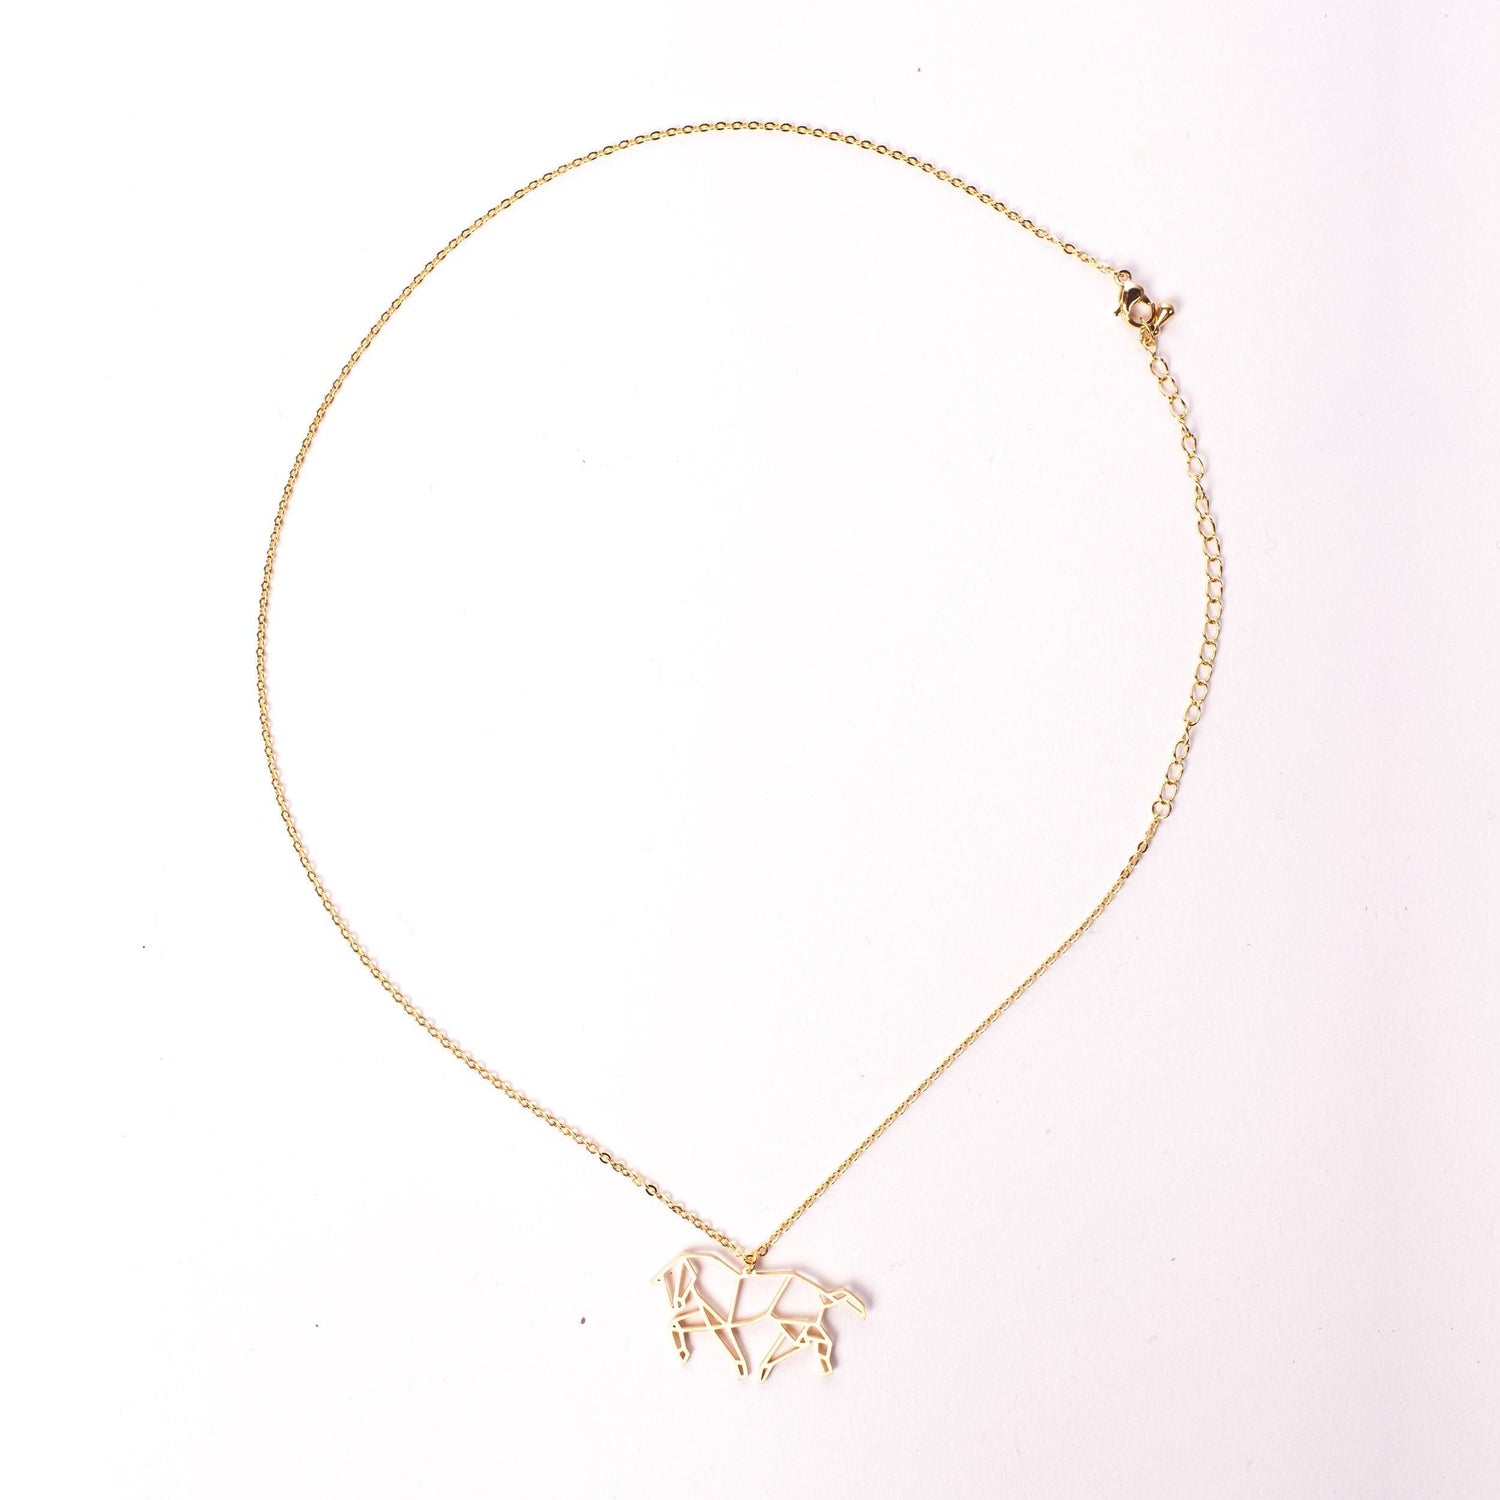 Horse Gold Origami Geometric Necklace